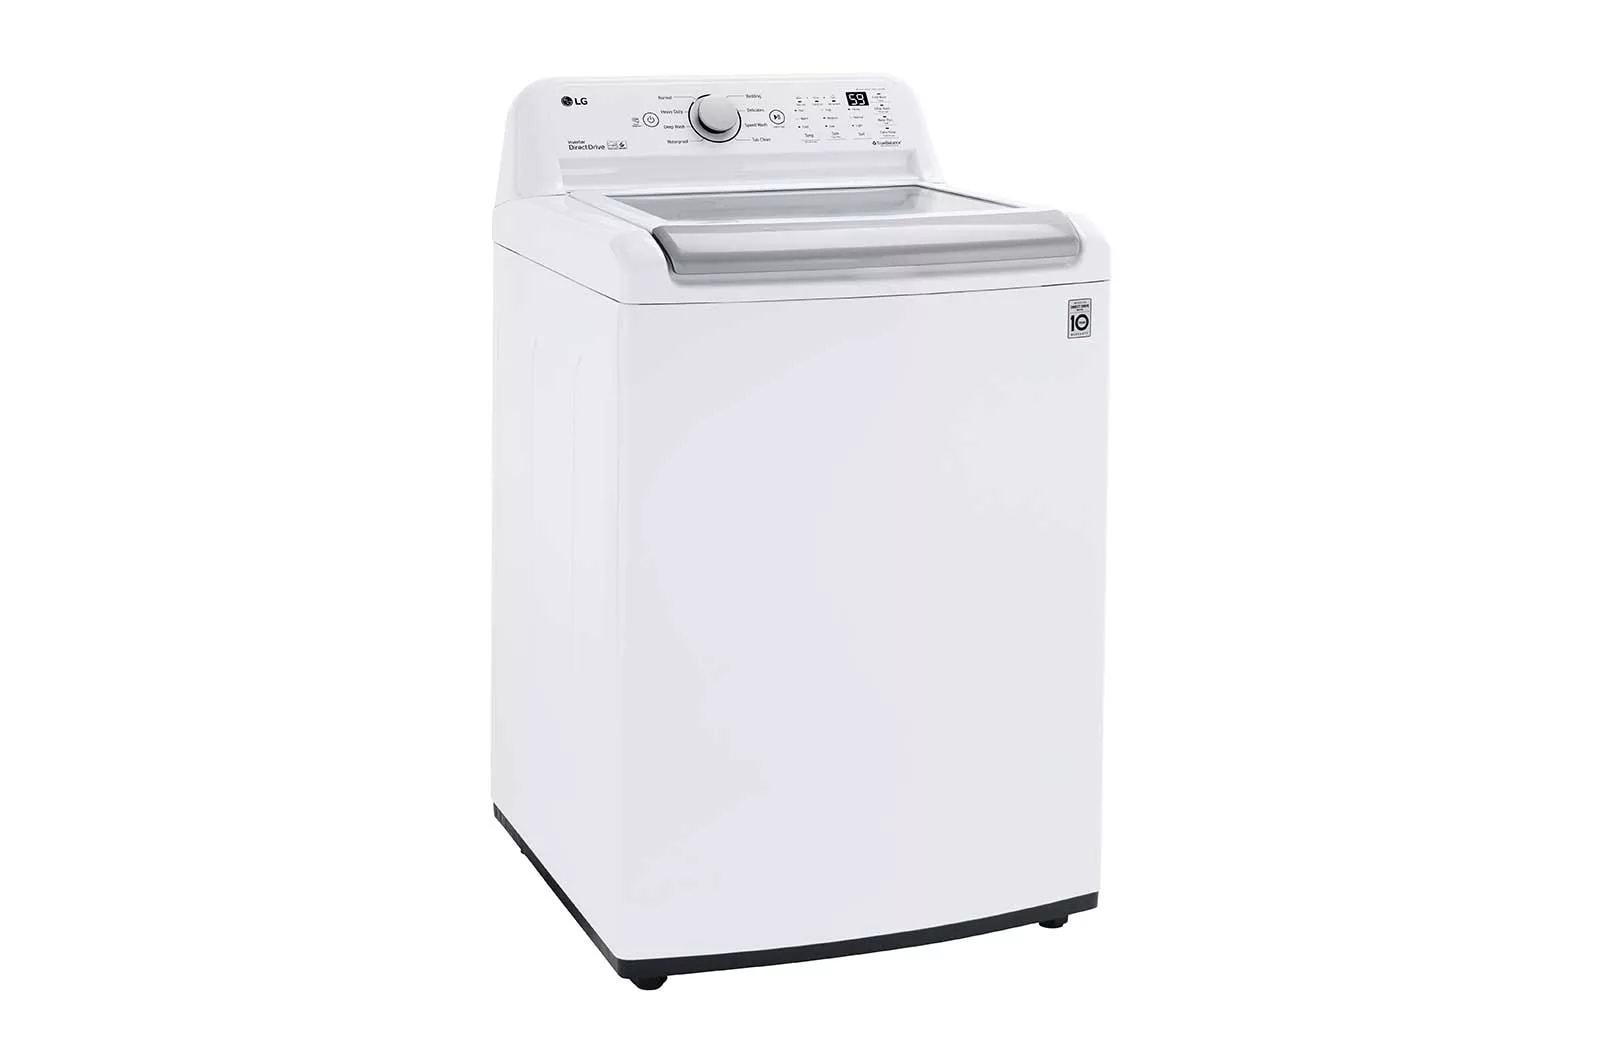 Lg Wt7150c 27" Wide 5 Cu. Ft. Energy Star Certified Top Loading Washing Machine - White - image 2 of 5